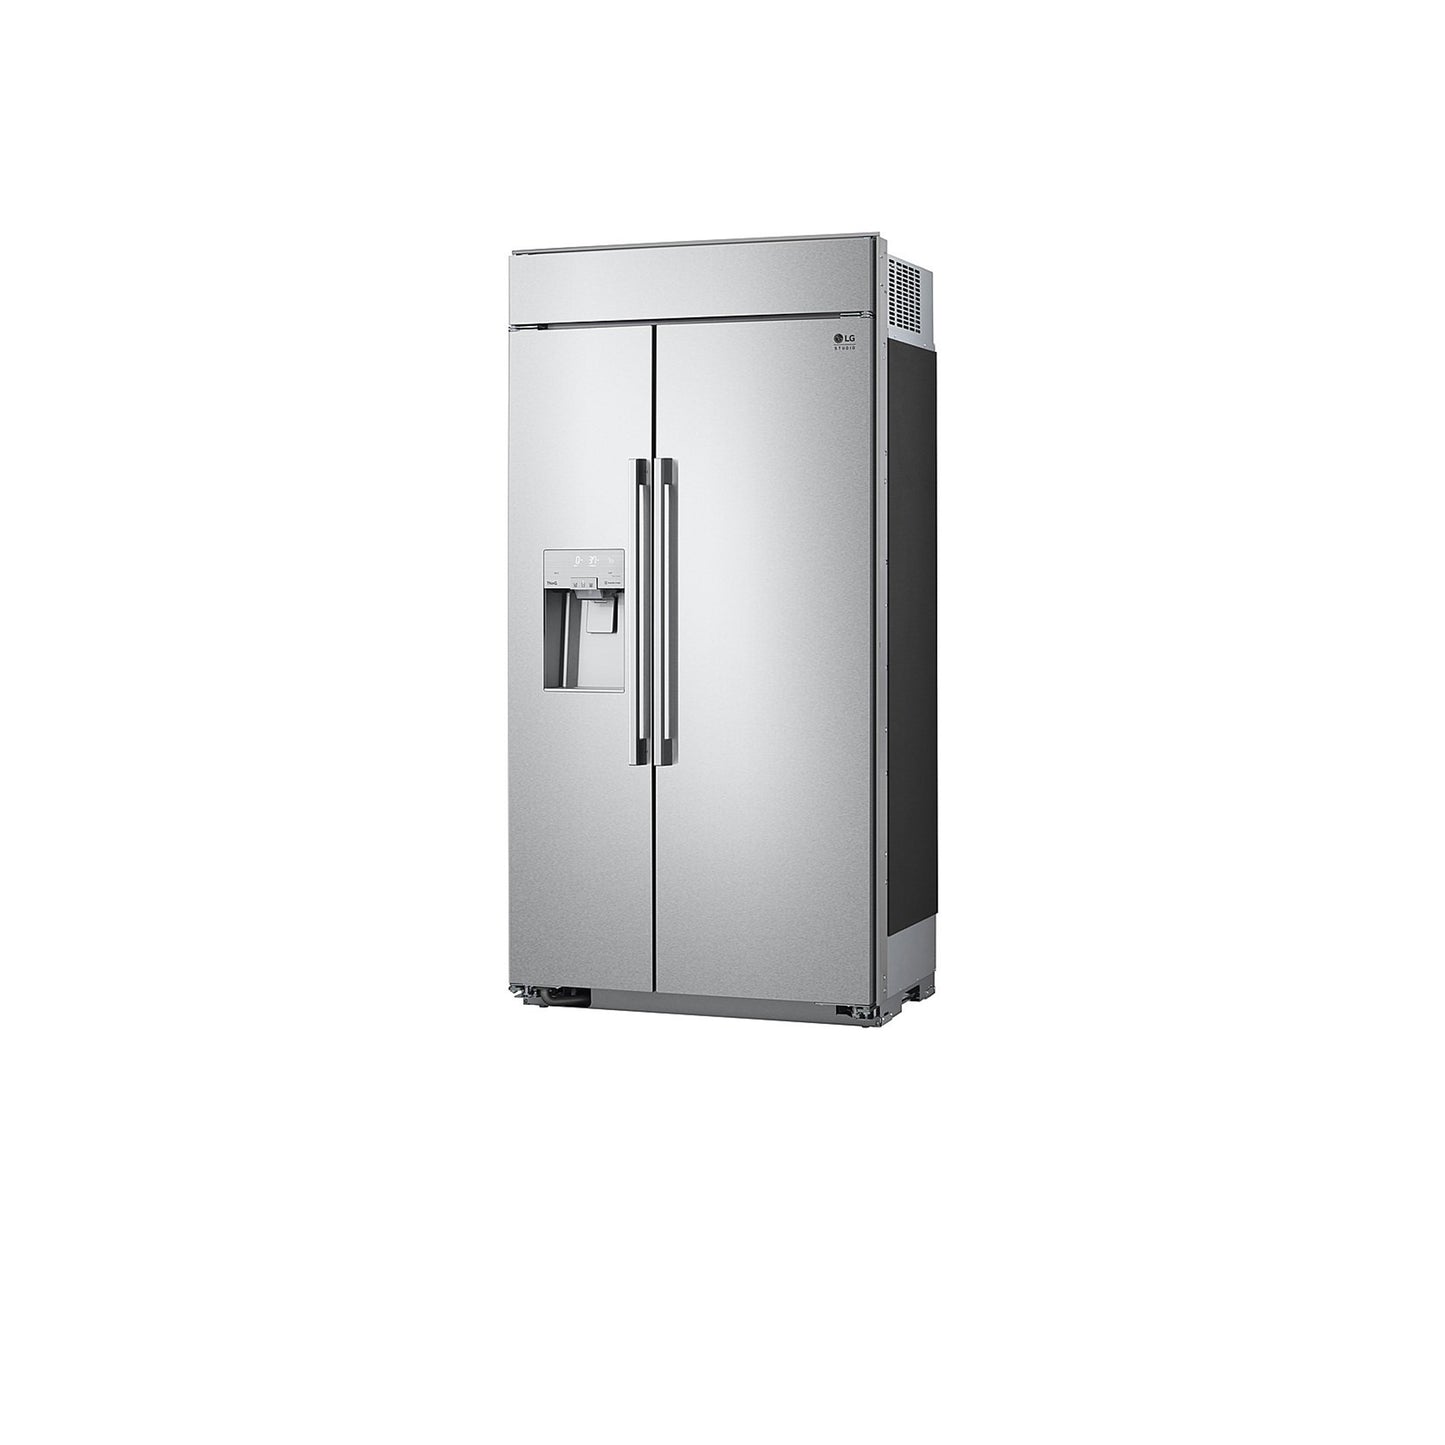 LG STUDIO 26 cu. ft. Smart Side-by-Side Built-In Refrigerator with Ice & Water Dispenser